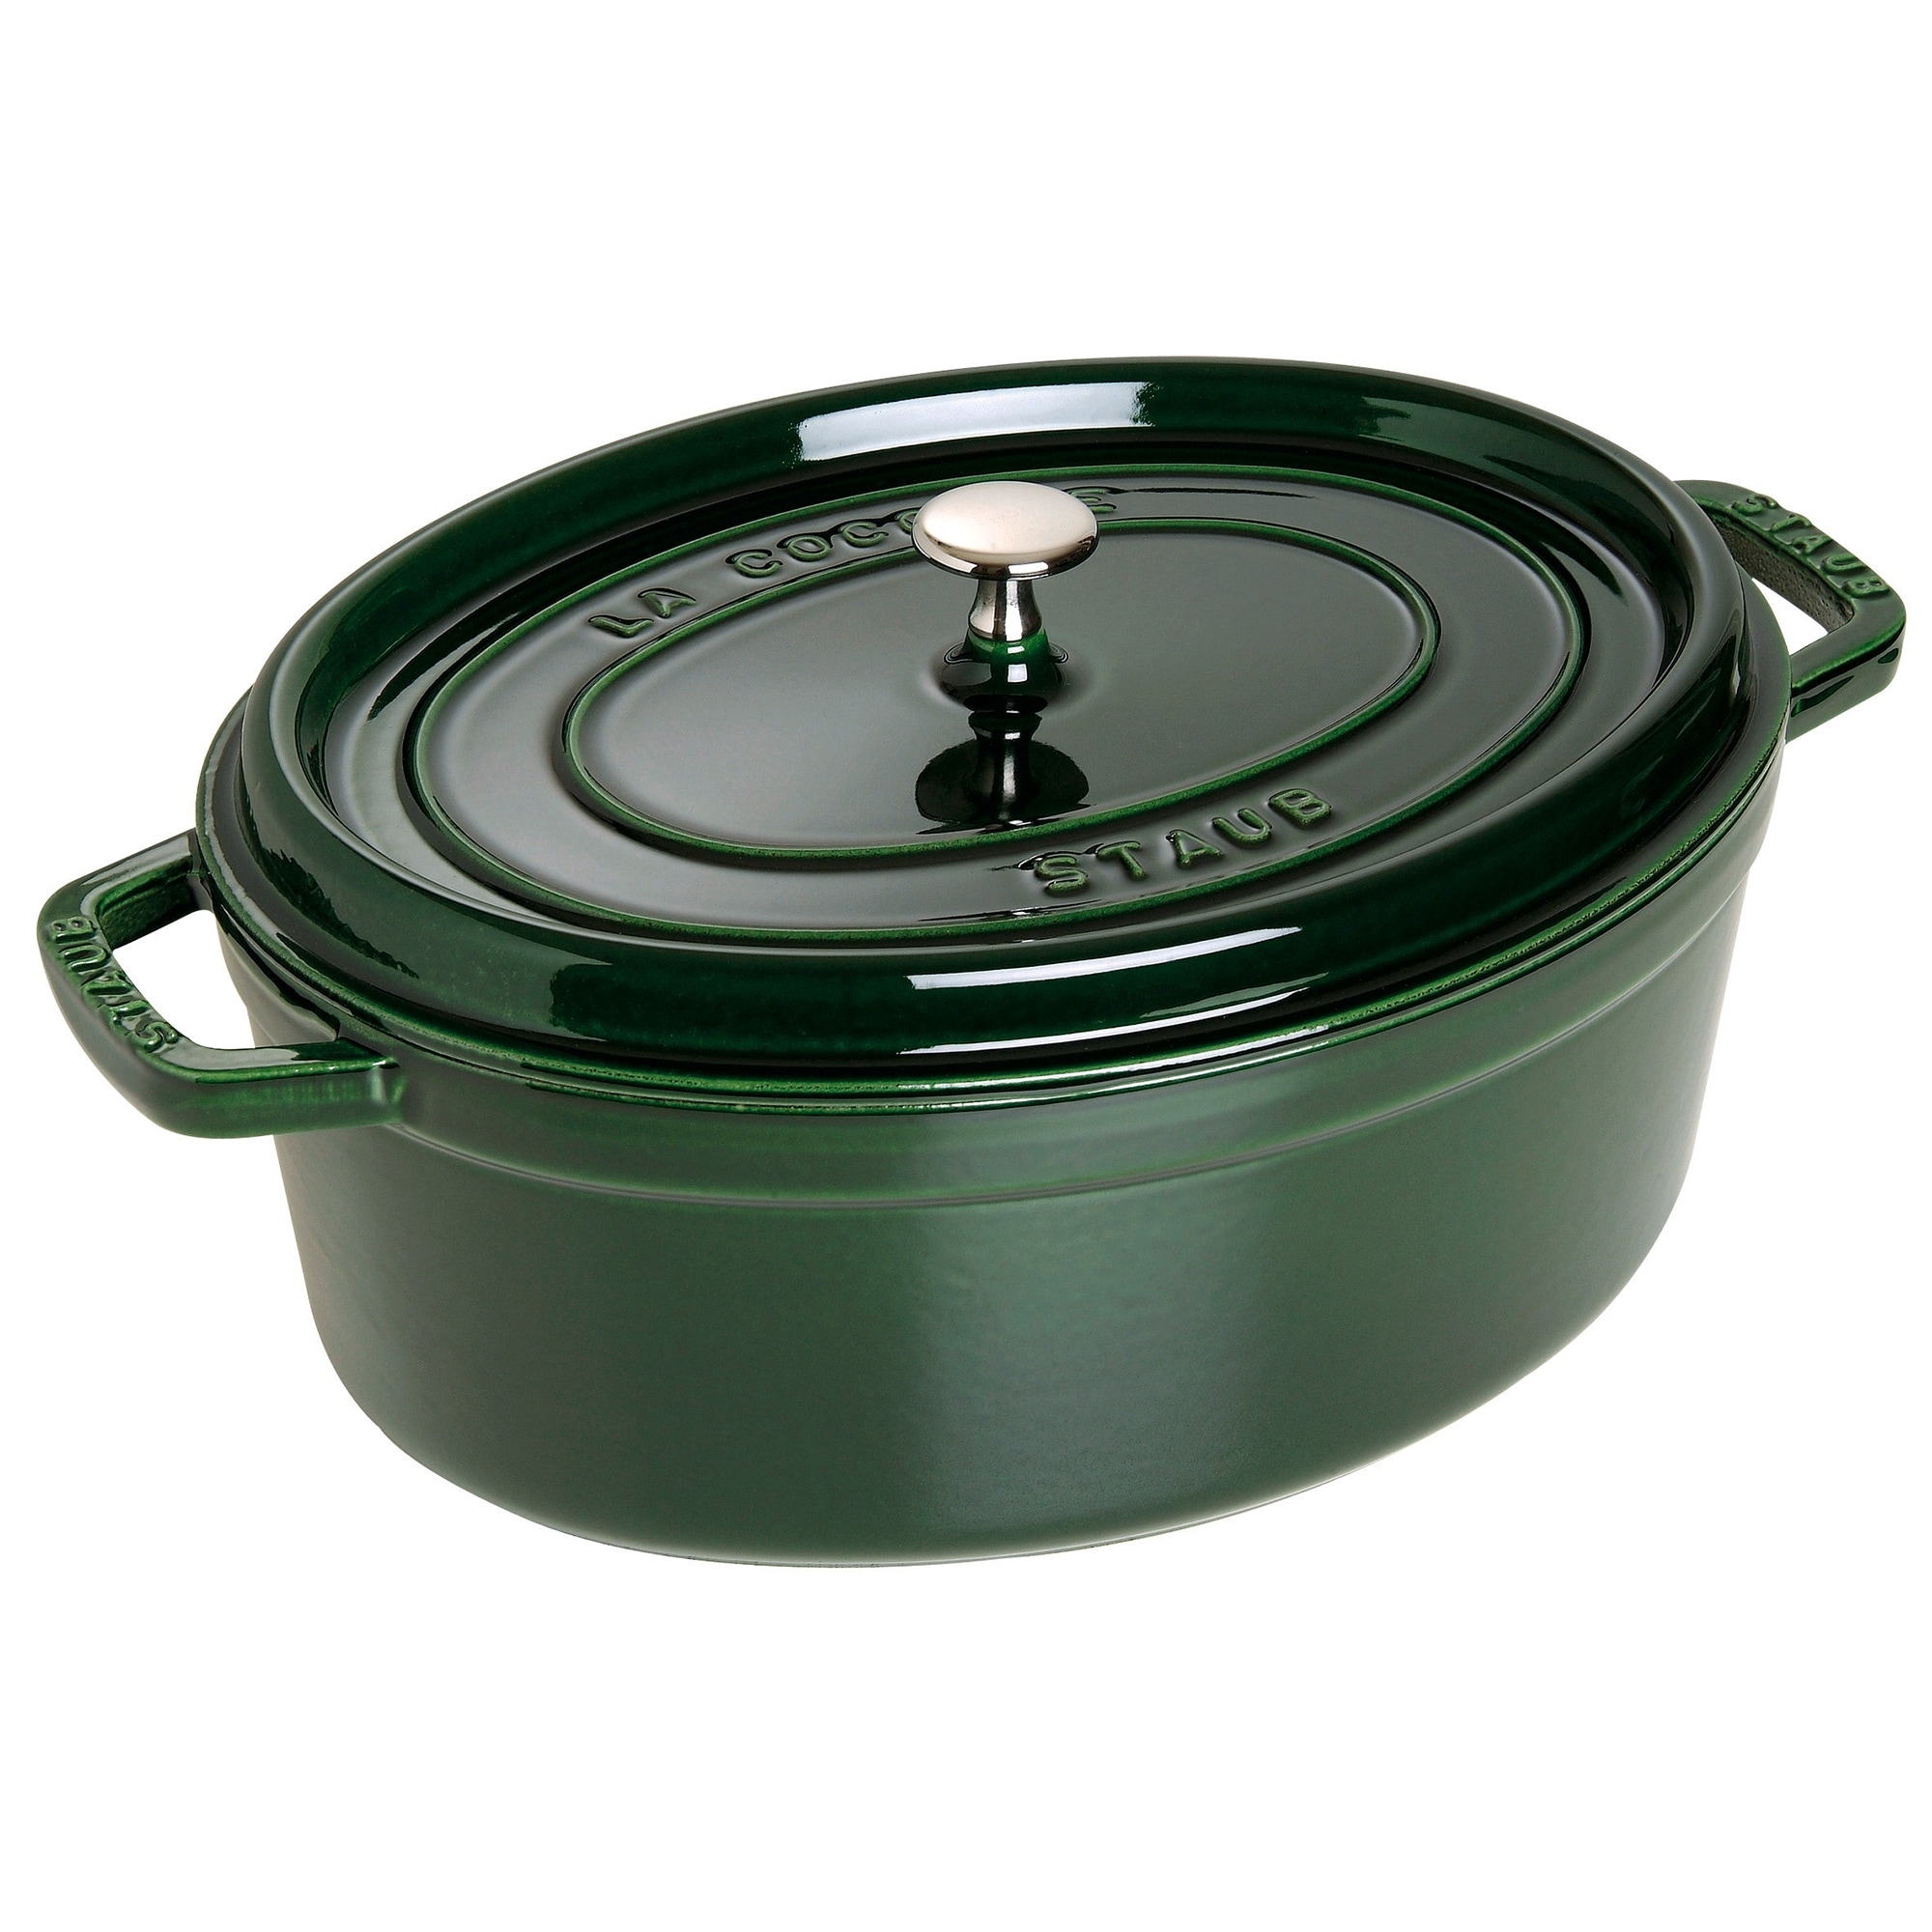 https://ak1.ostkcdn.com/images/products/is/images/direct/80538a4d7bf5e71c3f88cae24bbc8ae5d778c79c/STAUB-Cast-Iron-Oval-Cocotte%2C-Dutch-Oven%2C-5.75-quart%2C-serves-5-6%2C-Made-in-France.jpg